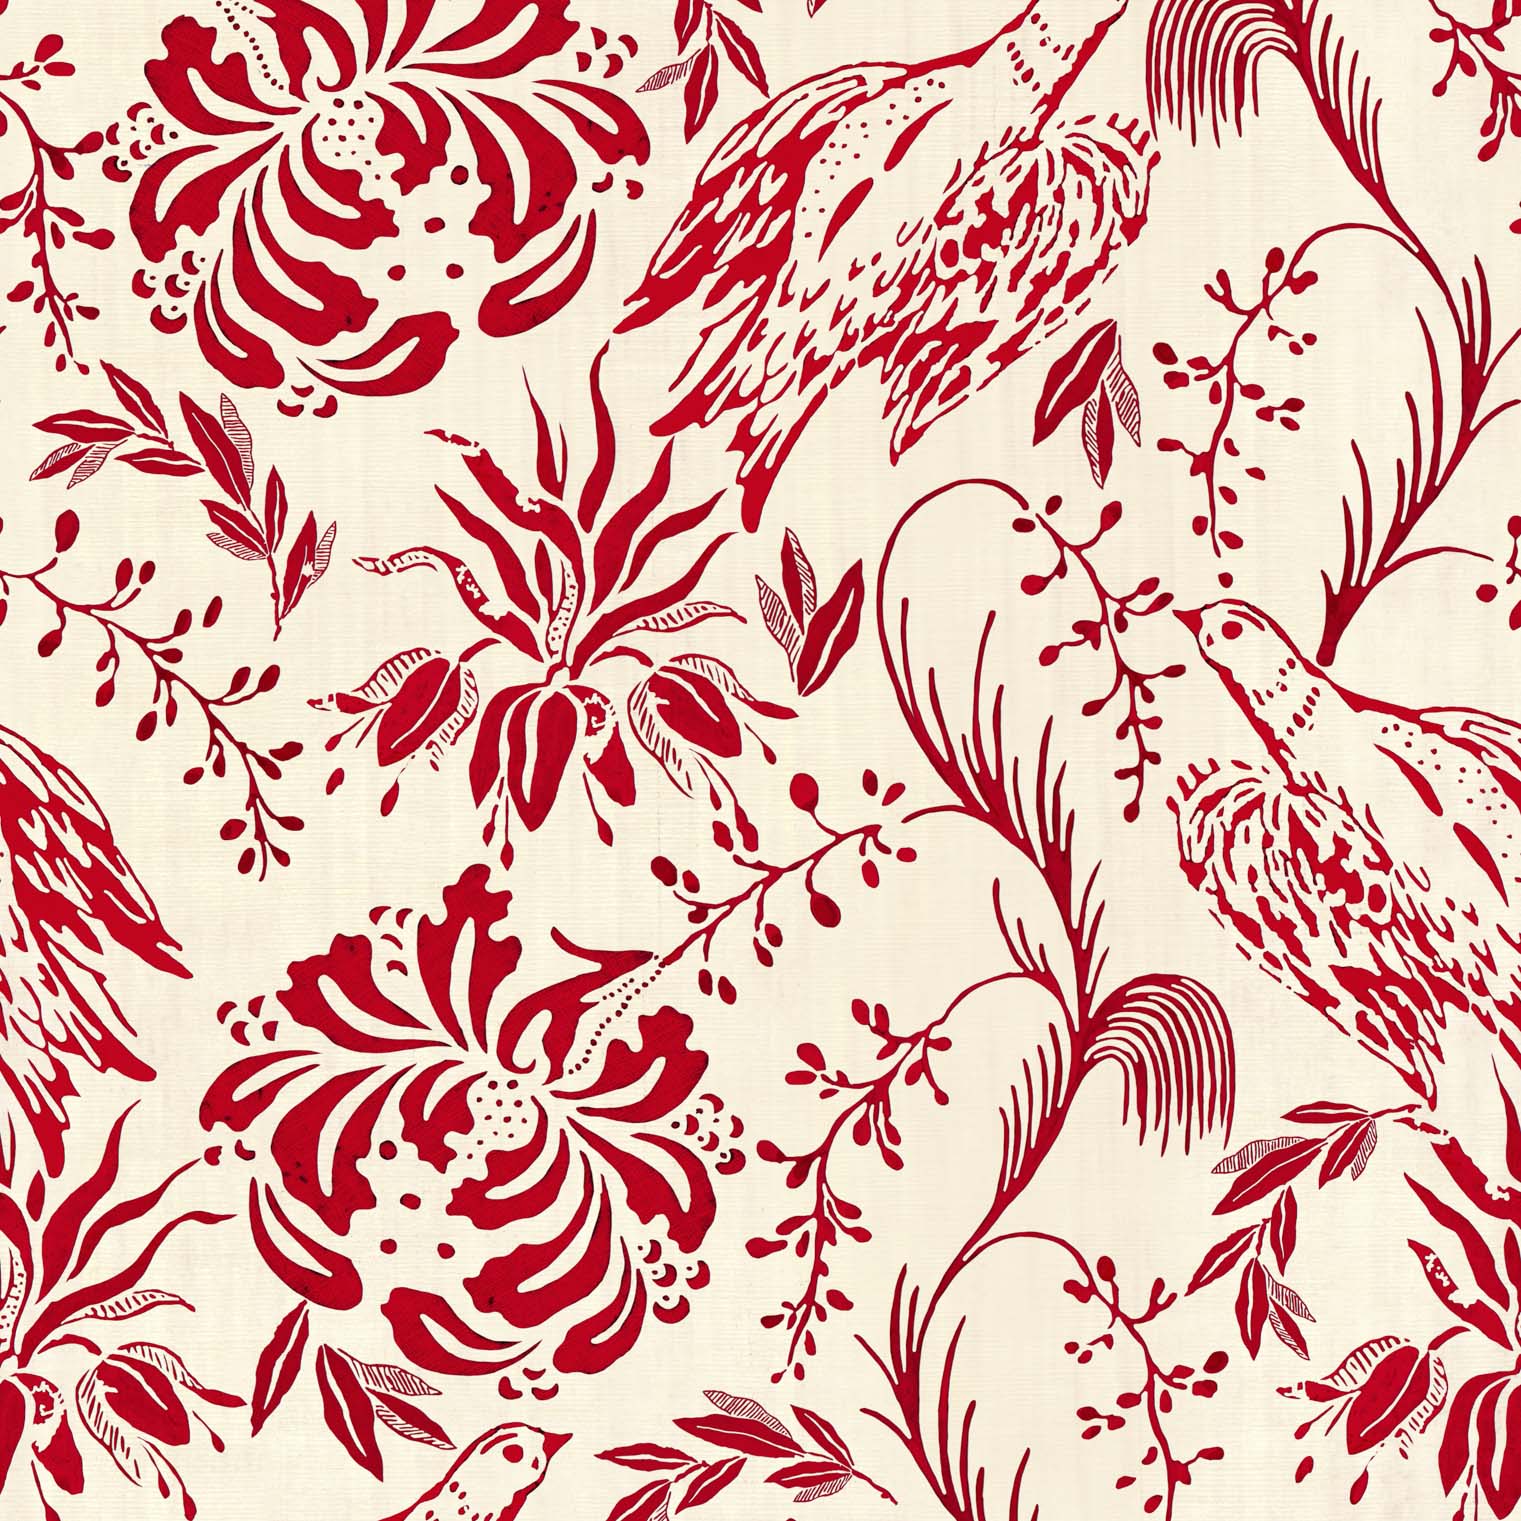 images/productimages/small/folk-embroidery-crimson-52x70cm-wp30014-wallpaper.jpg